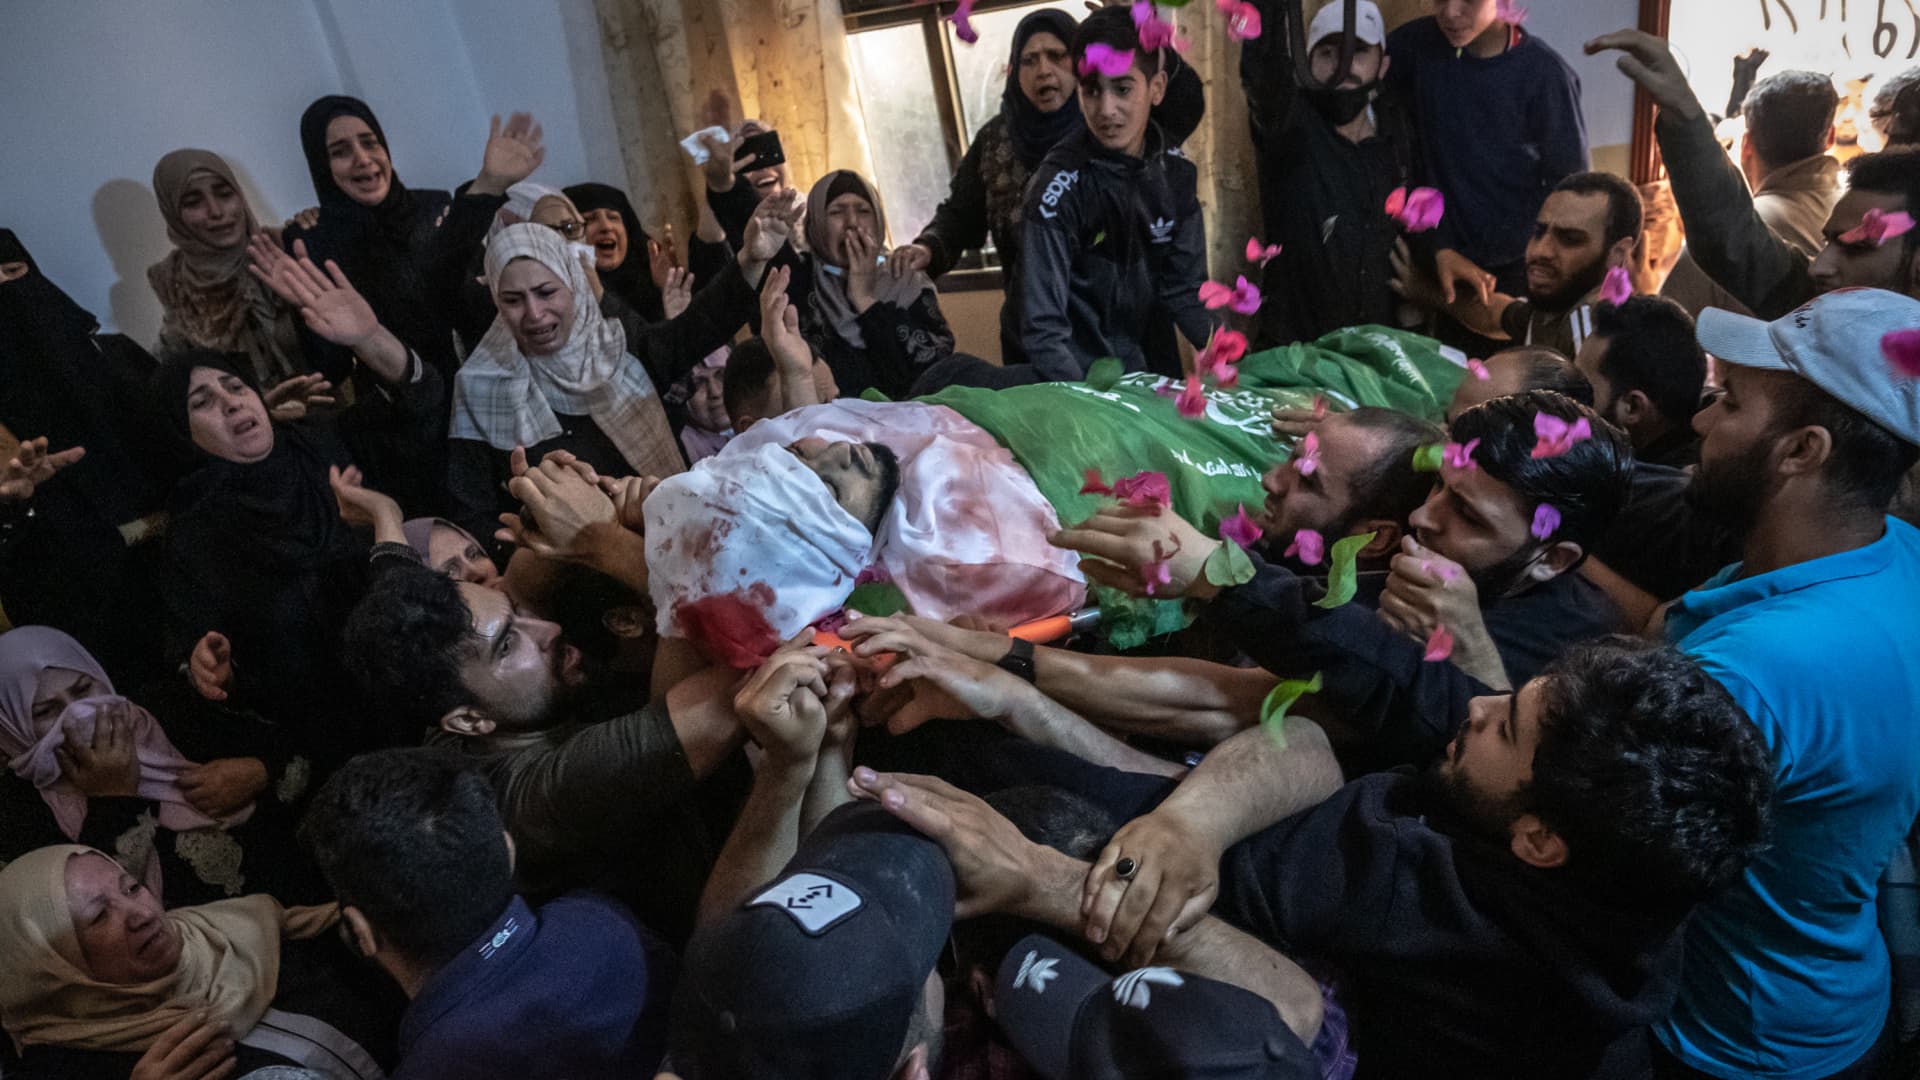 Relatives of Palestinian Ahmed Al-Shenbari, who was killed during an Israeli raid in Beit Hanoun city on the northern Gaza Strip, mourn during his funeral on May 11, 2021 in Gaza City, Gaza.